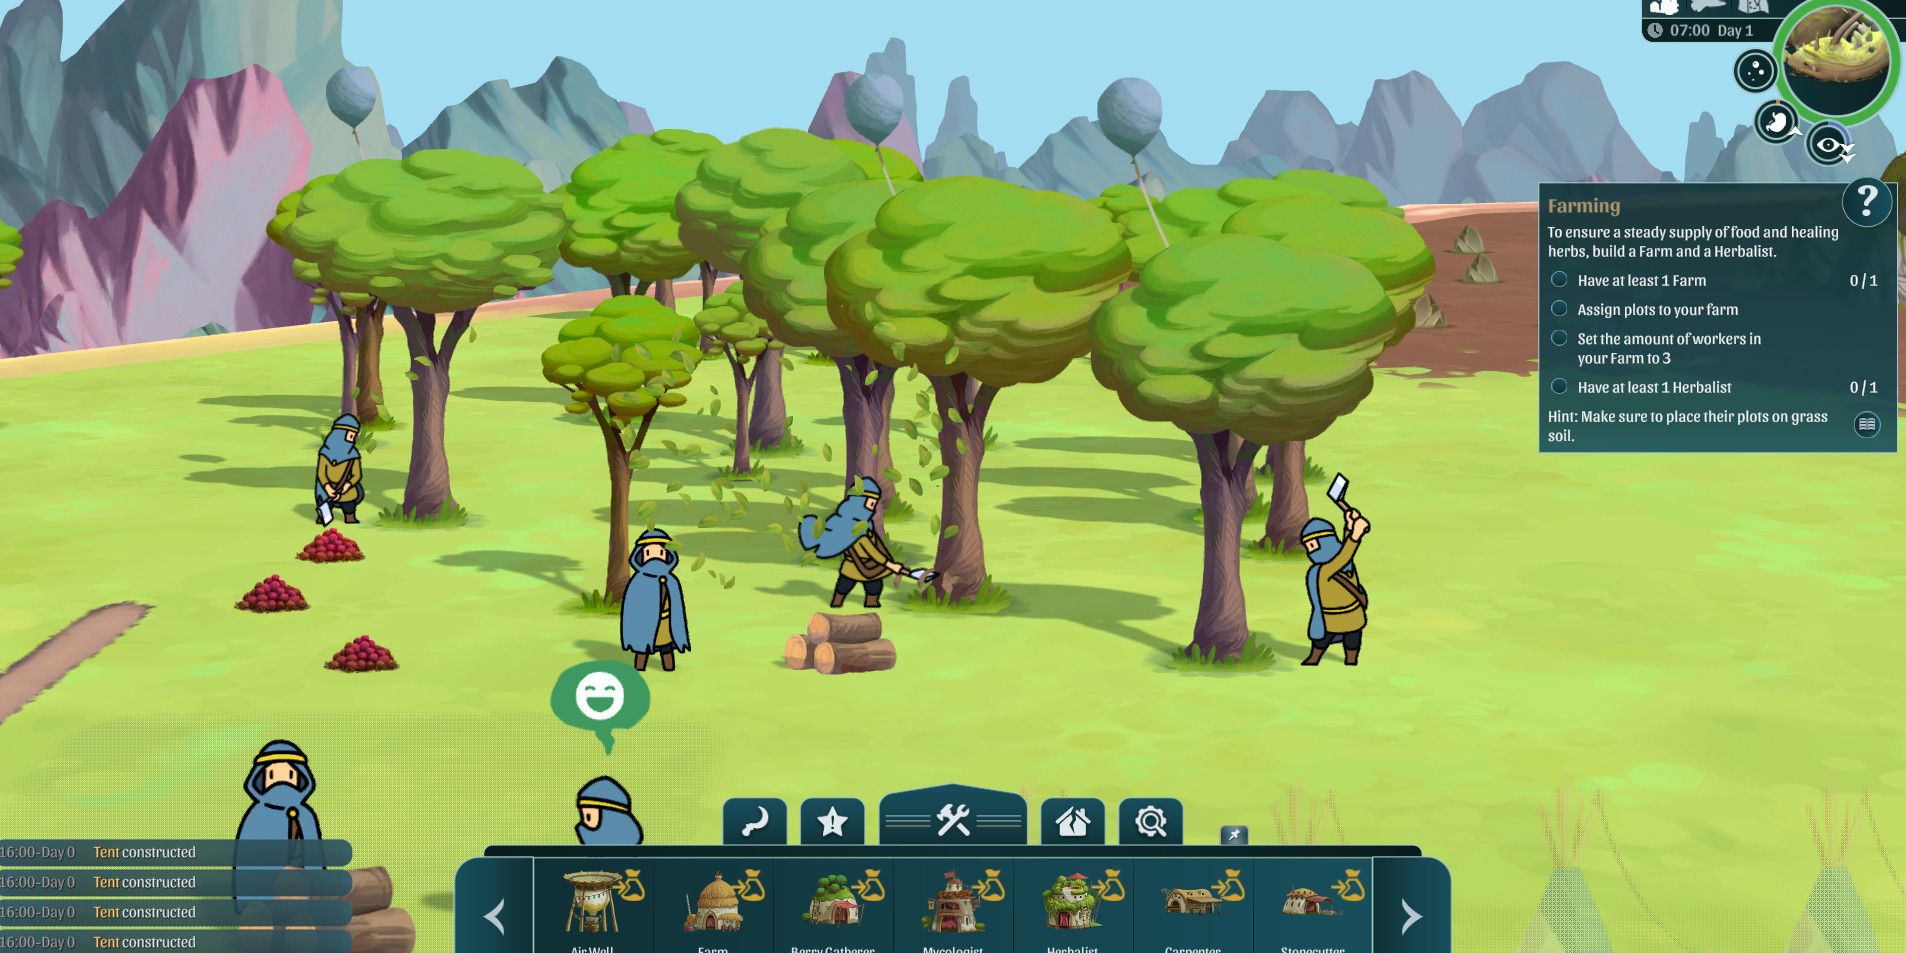 villagers chopping trees down